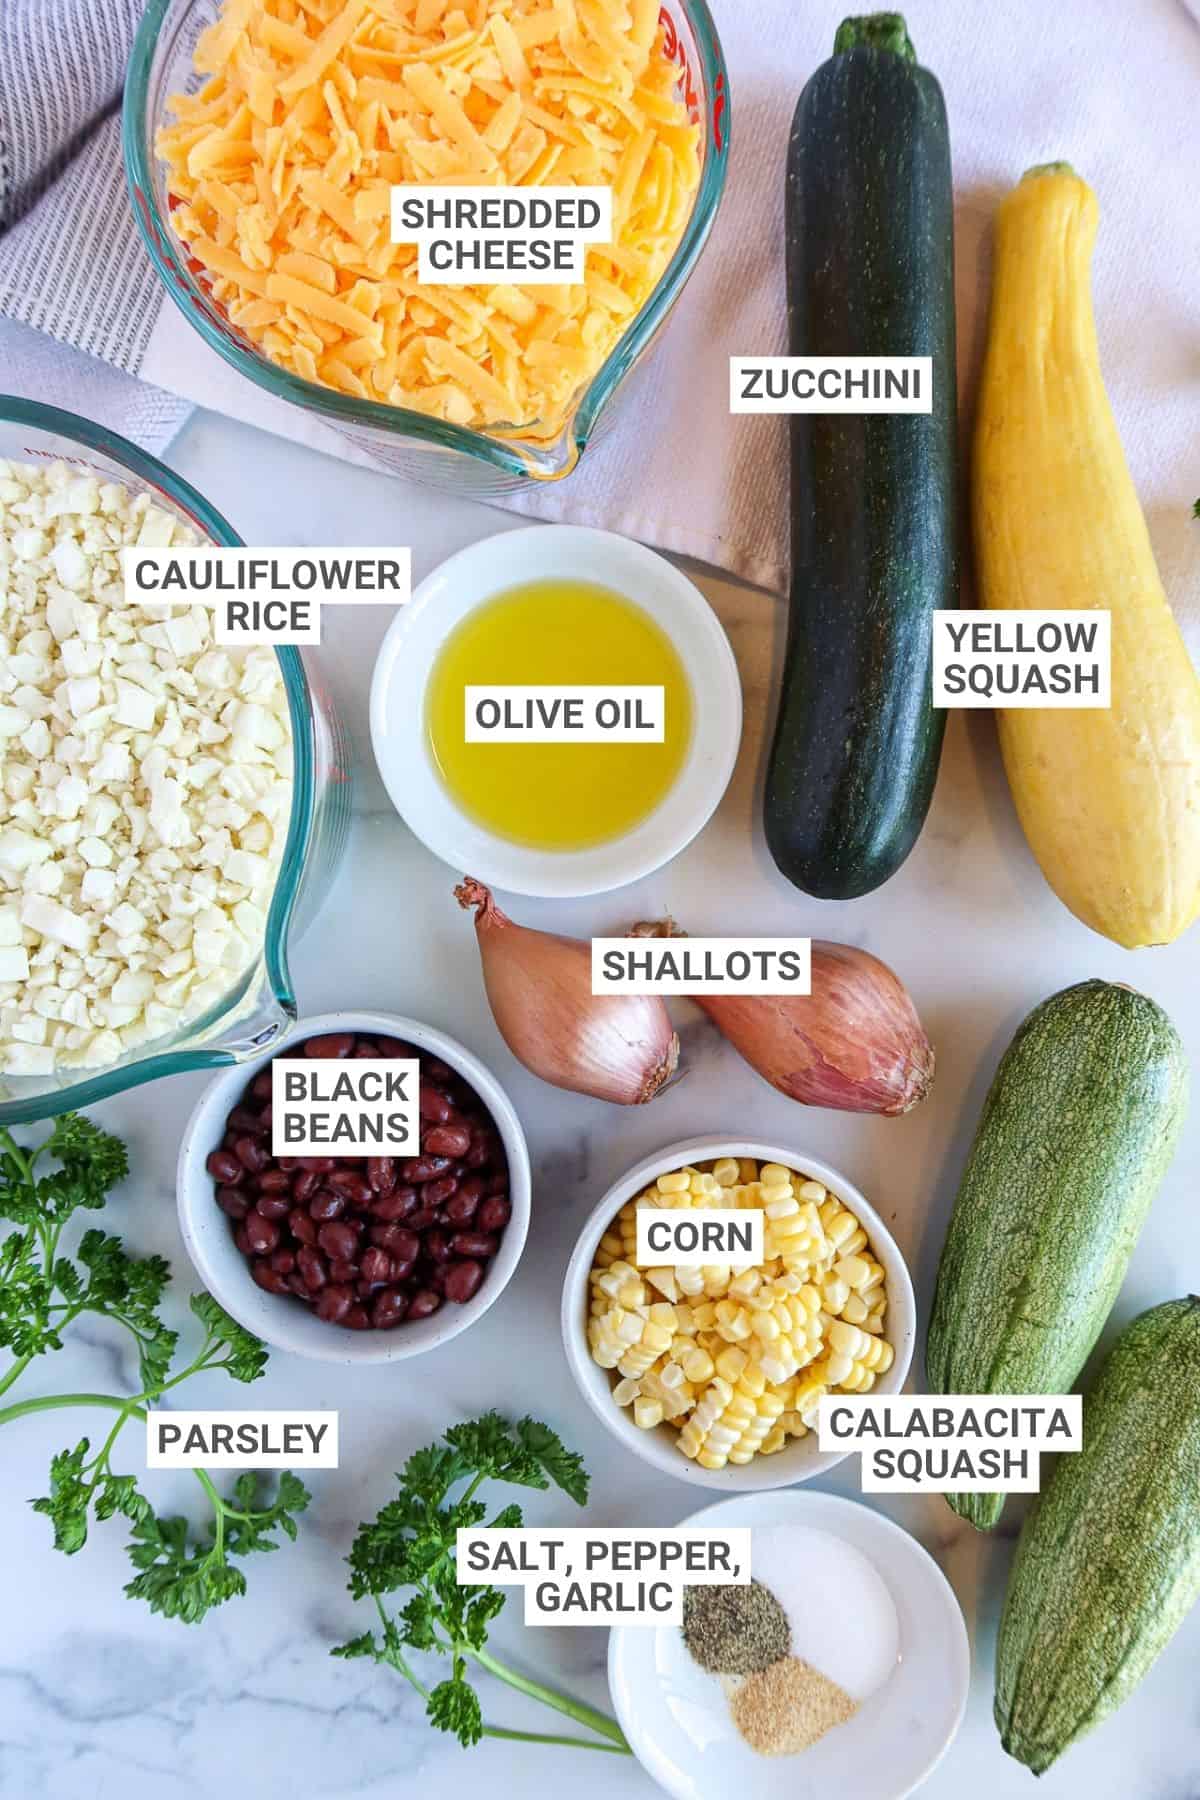 Ingredients for zucchini, squash and corn casserole arranged on a countertop with text overlay labels.